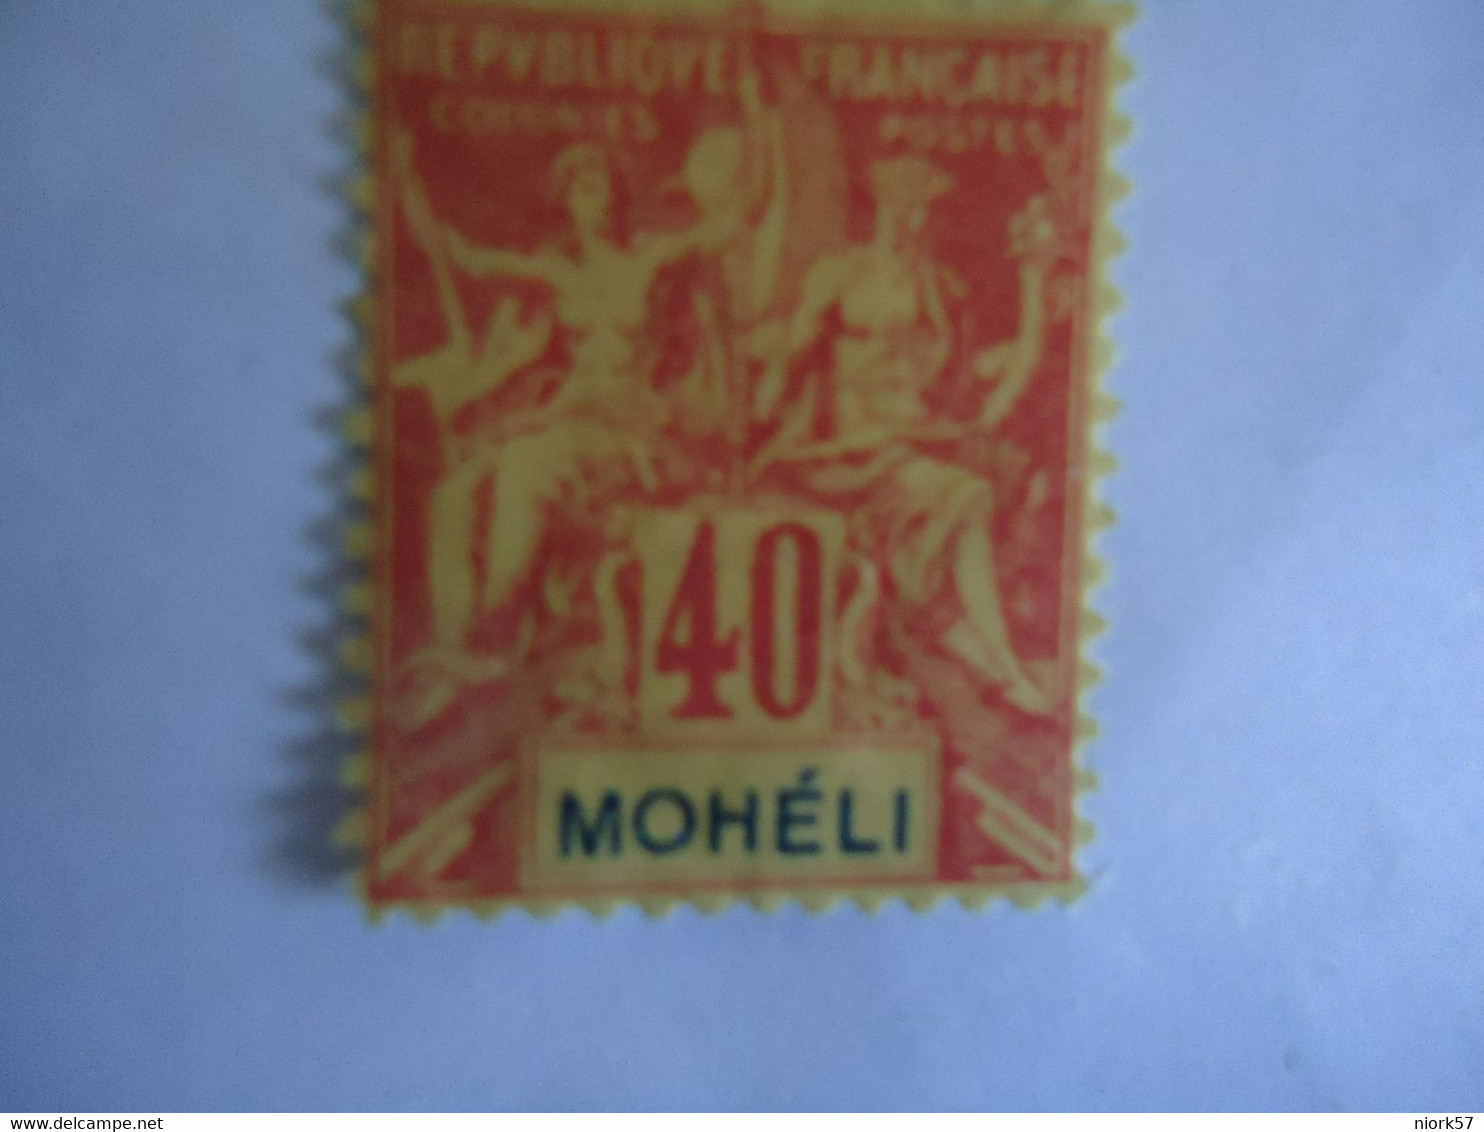 MOHELI FRANCE  COLONIES MLN  STAMPS   40C - Usados